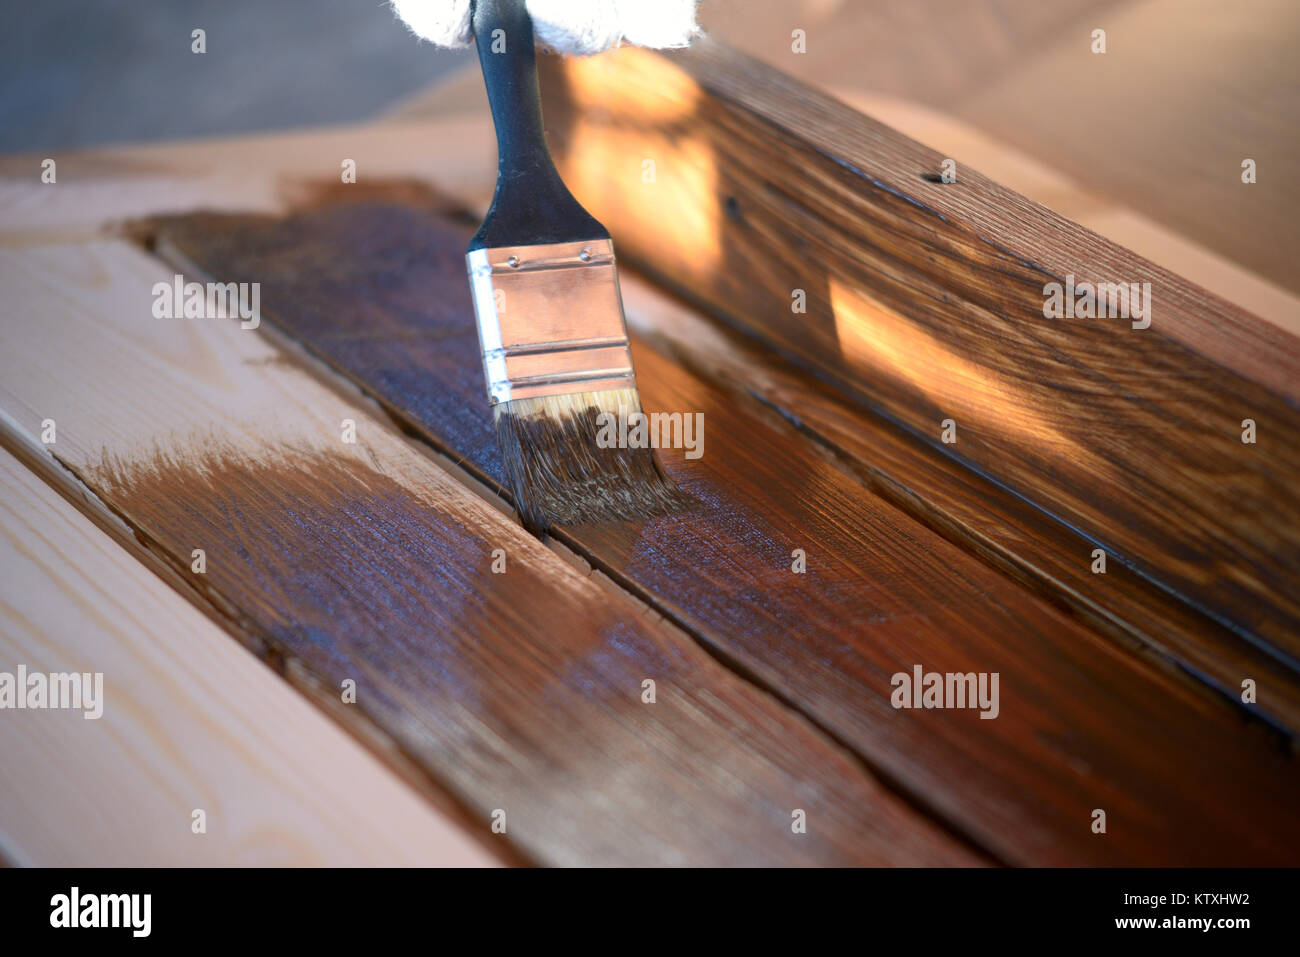 Hand with a brush paints a wooden surface with brown paint, close up Stock Photo